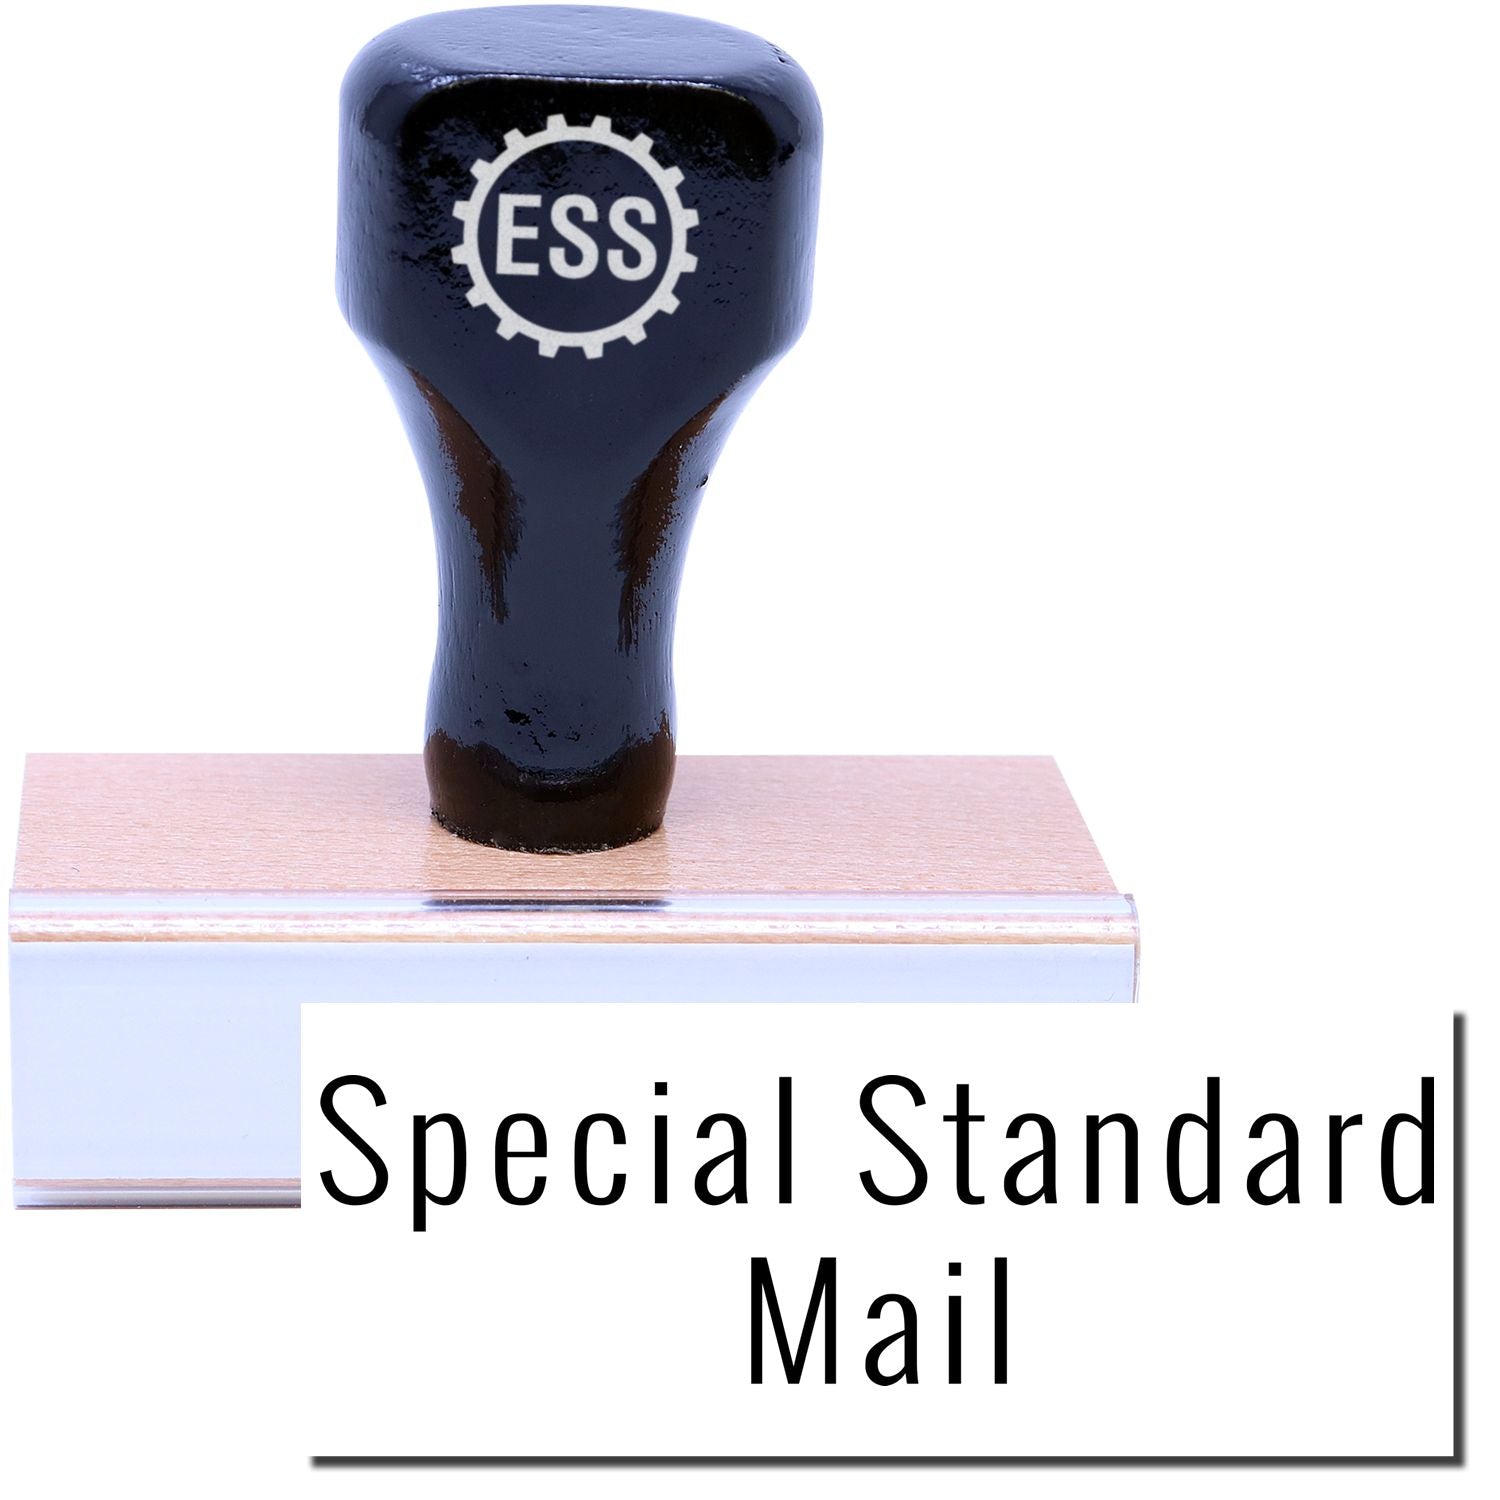 A stock office rubber stamp with a stamped image showing how the text "SPECIAL STANDARD MAIL" in a large font is displayed after stamping.